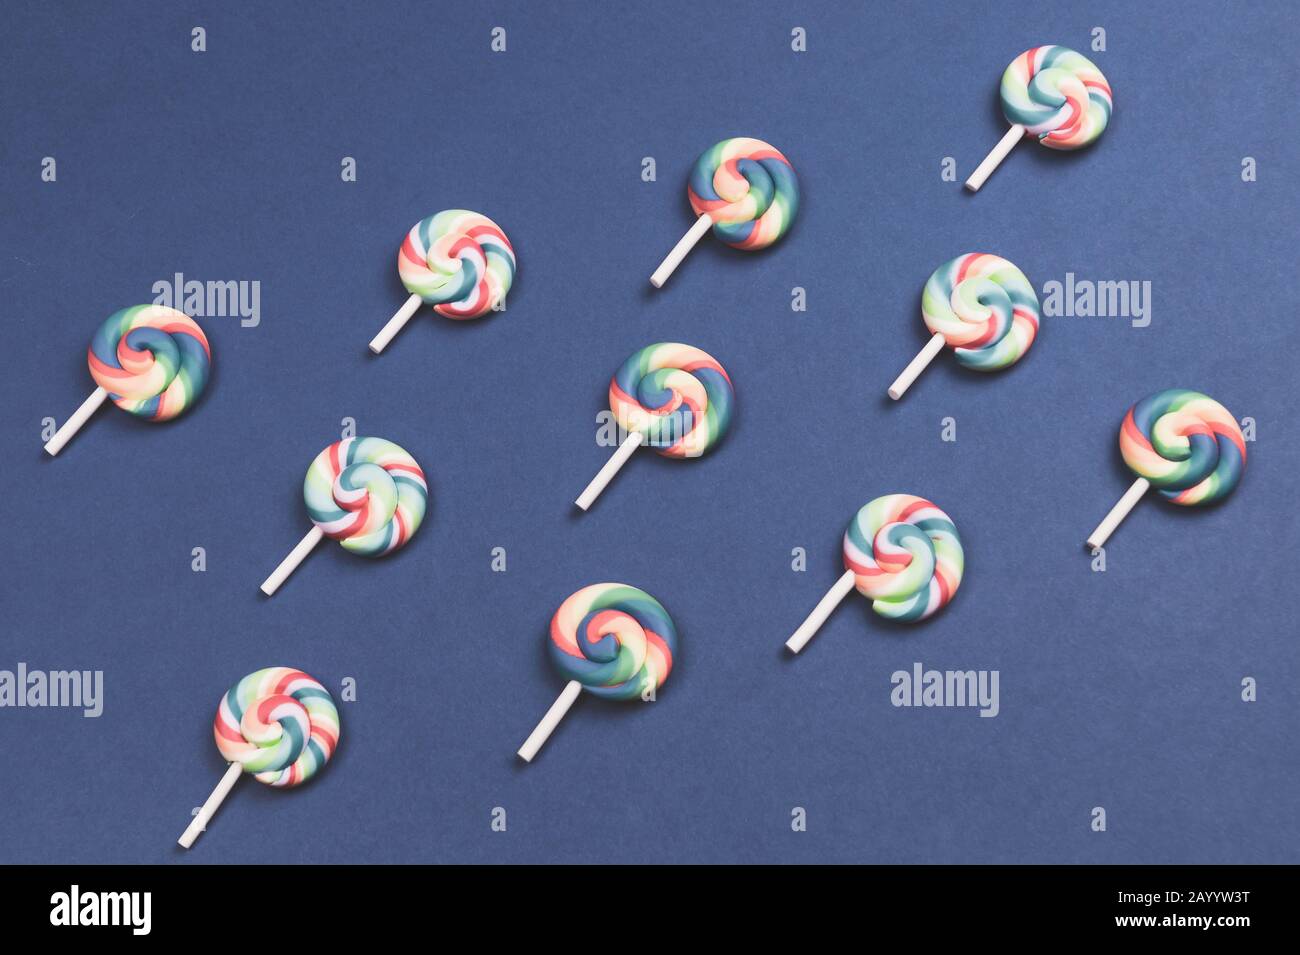 Lollipops are arranged symmetrically on a colored background. colorful candies. pattern of sweets Stock Photo